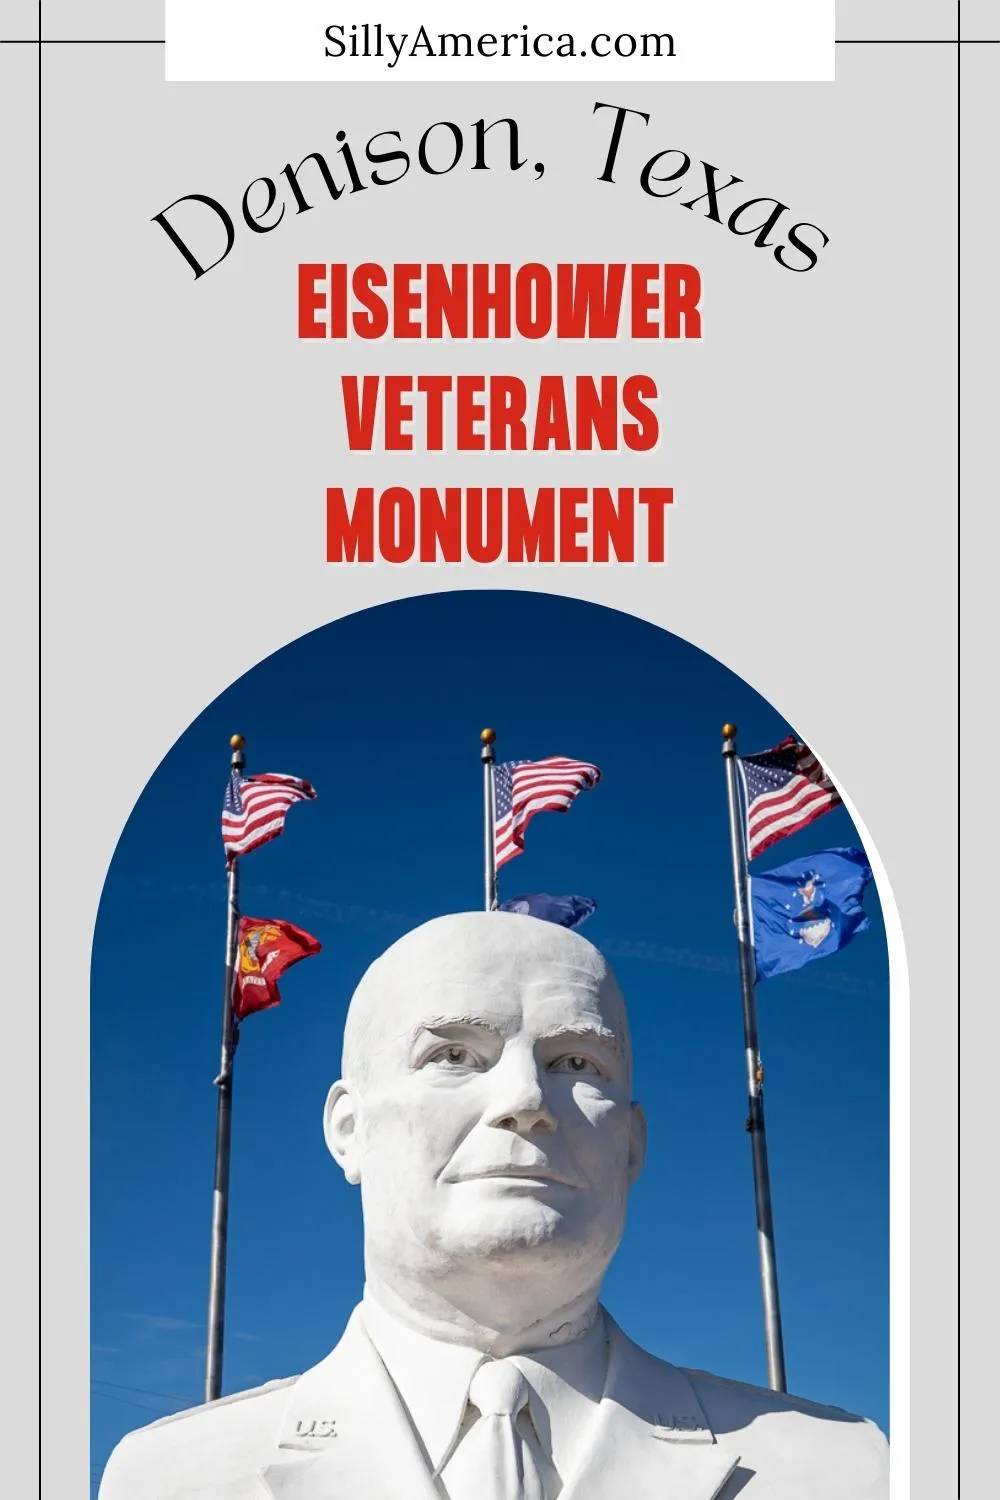 There are many weird presidential monuments and roadside attractions across the United States. And of those a popular theme is giant president heads. I mean, you probably need to have a big head to become president, but these are over the top all the same. You can find one such giant president head at the Eisenhower Veterans Monument in Denison, Texas. #RoadTrip #texasRoadTrip #RoadsideAttraction #RoadsideAttractions #TexasRoadsideAttraction #TexasRoadsideAttractions #PresidentsDay